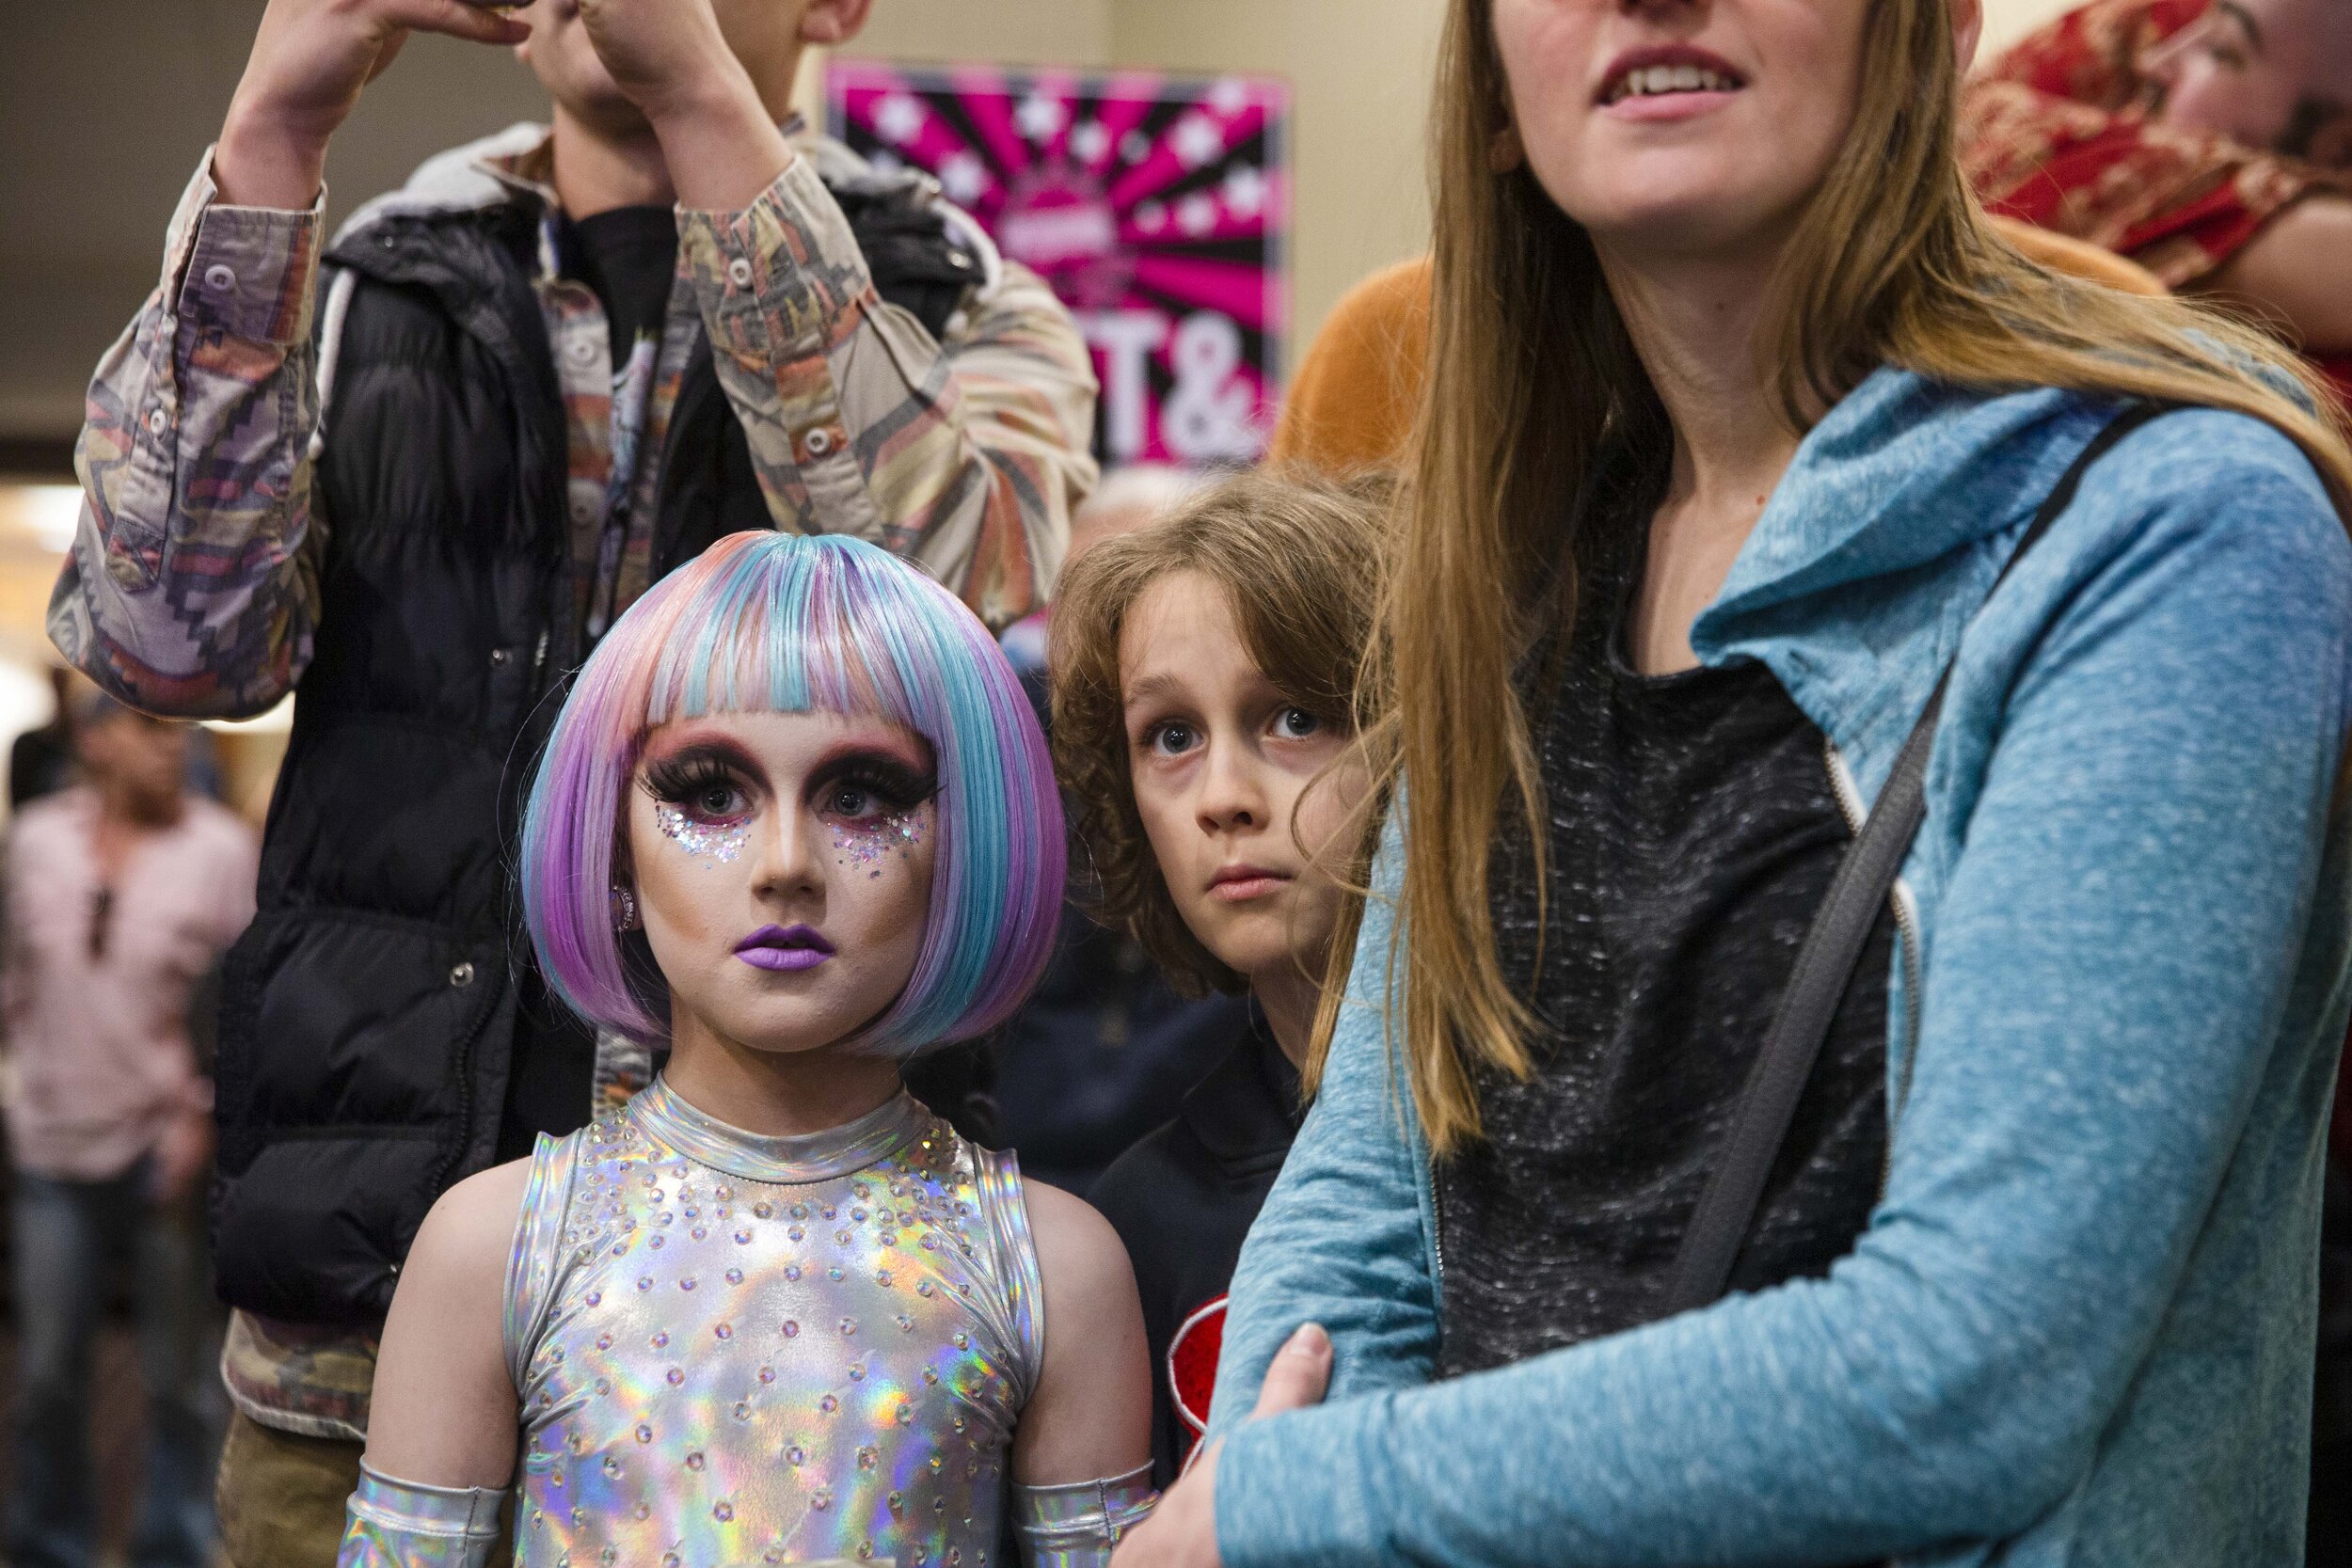  Keegan, a gender creative child, then 8, left, and his brother Noah, 10, middle, accompanied by his family, look on after arriving at the Austin International Drag Fest 2018 in Austin, Texas, U.S., Nov. 18, 2018.  